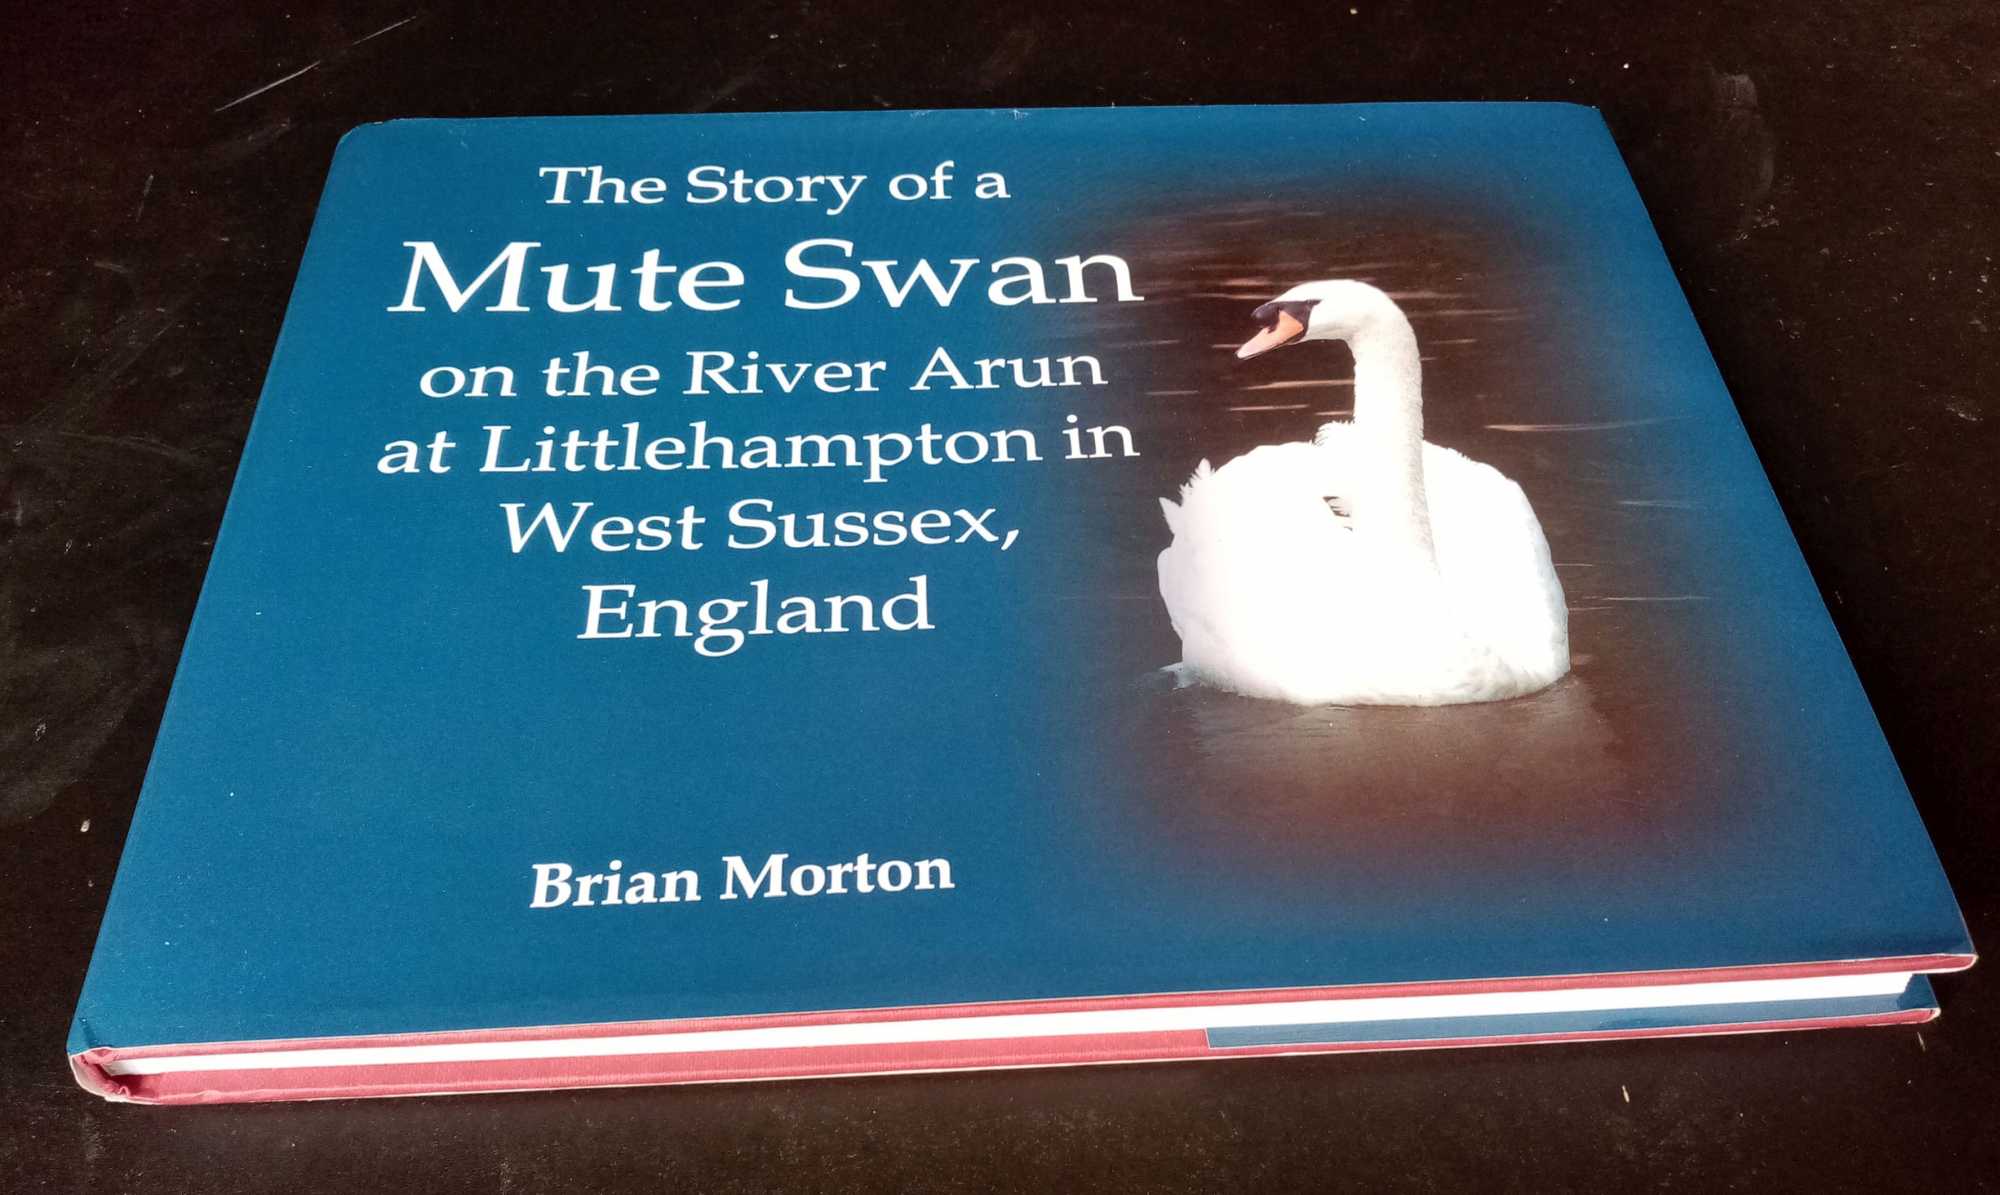 Brian Morton - The Story of a Mute Swan on the River Arun at Littlehampton in West Sussex, England